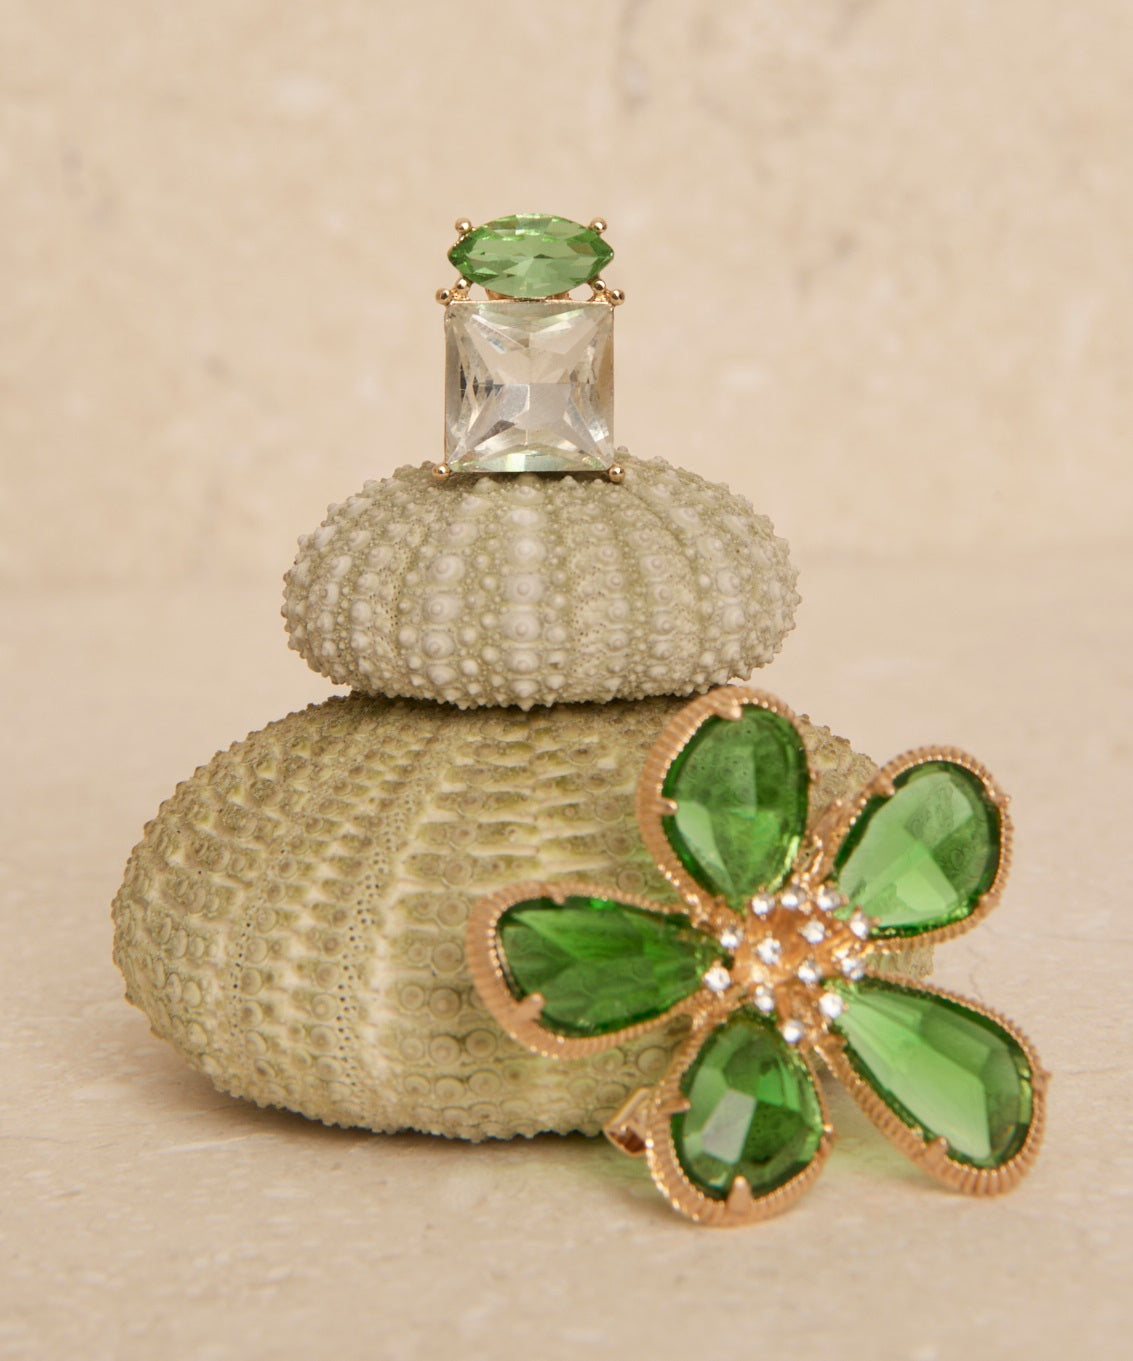 A flower-shaped brooch with gold-coloured plating and faceted green stone petals rests against a rock. On top of the rock is a single earring with a clear faceted square stone and a green oval stone accent. 